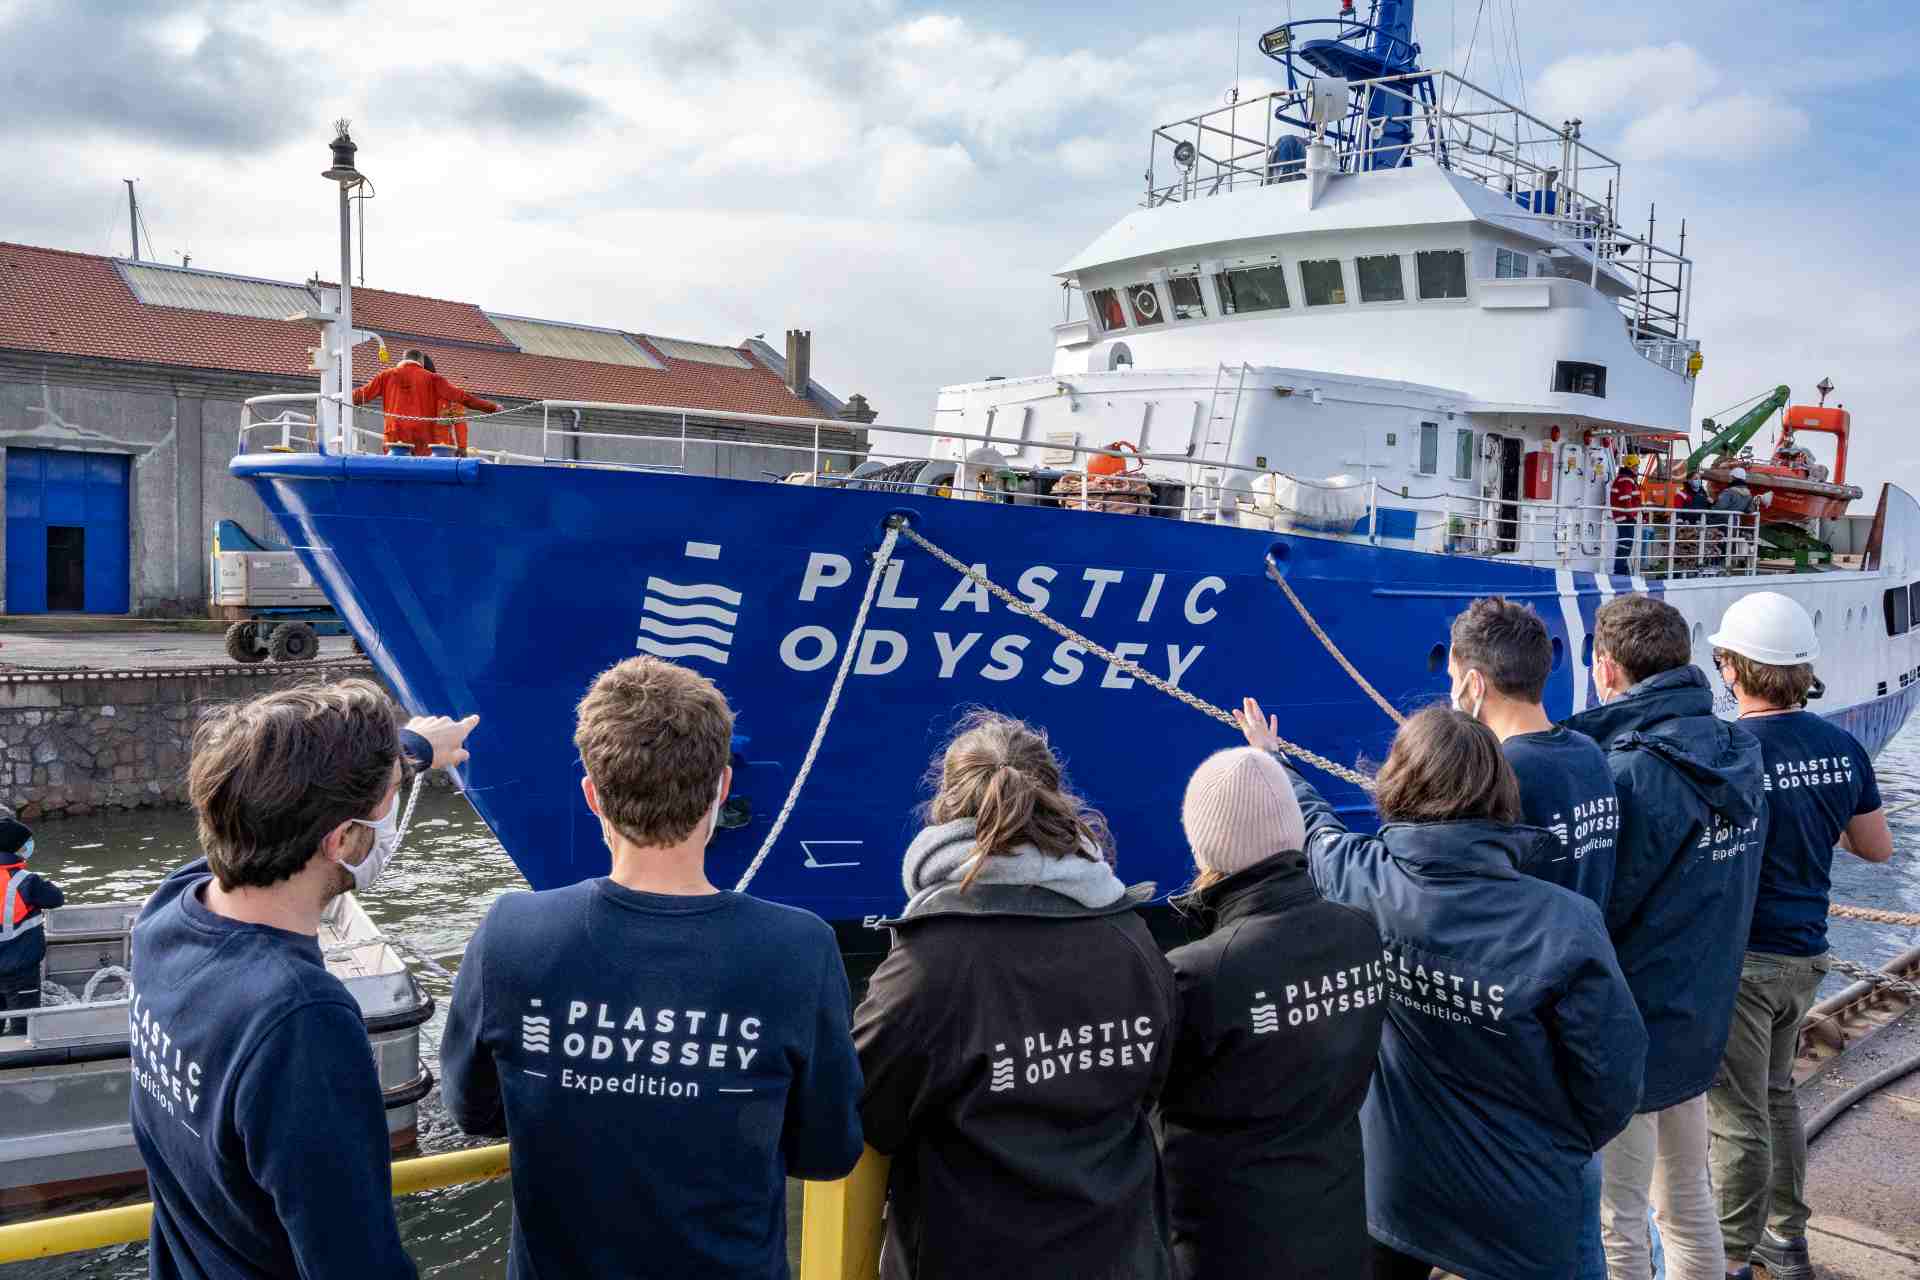 Plastic Odyssey boat launching in Dunkerque, some association members are standing on the dock, looking at the Plastic Odyssey ship.